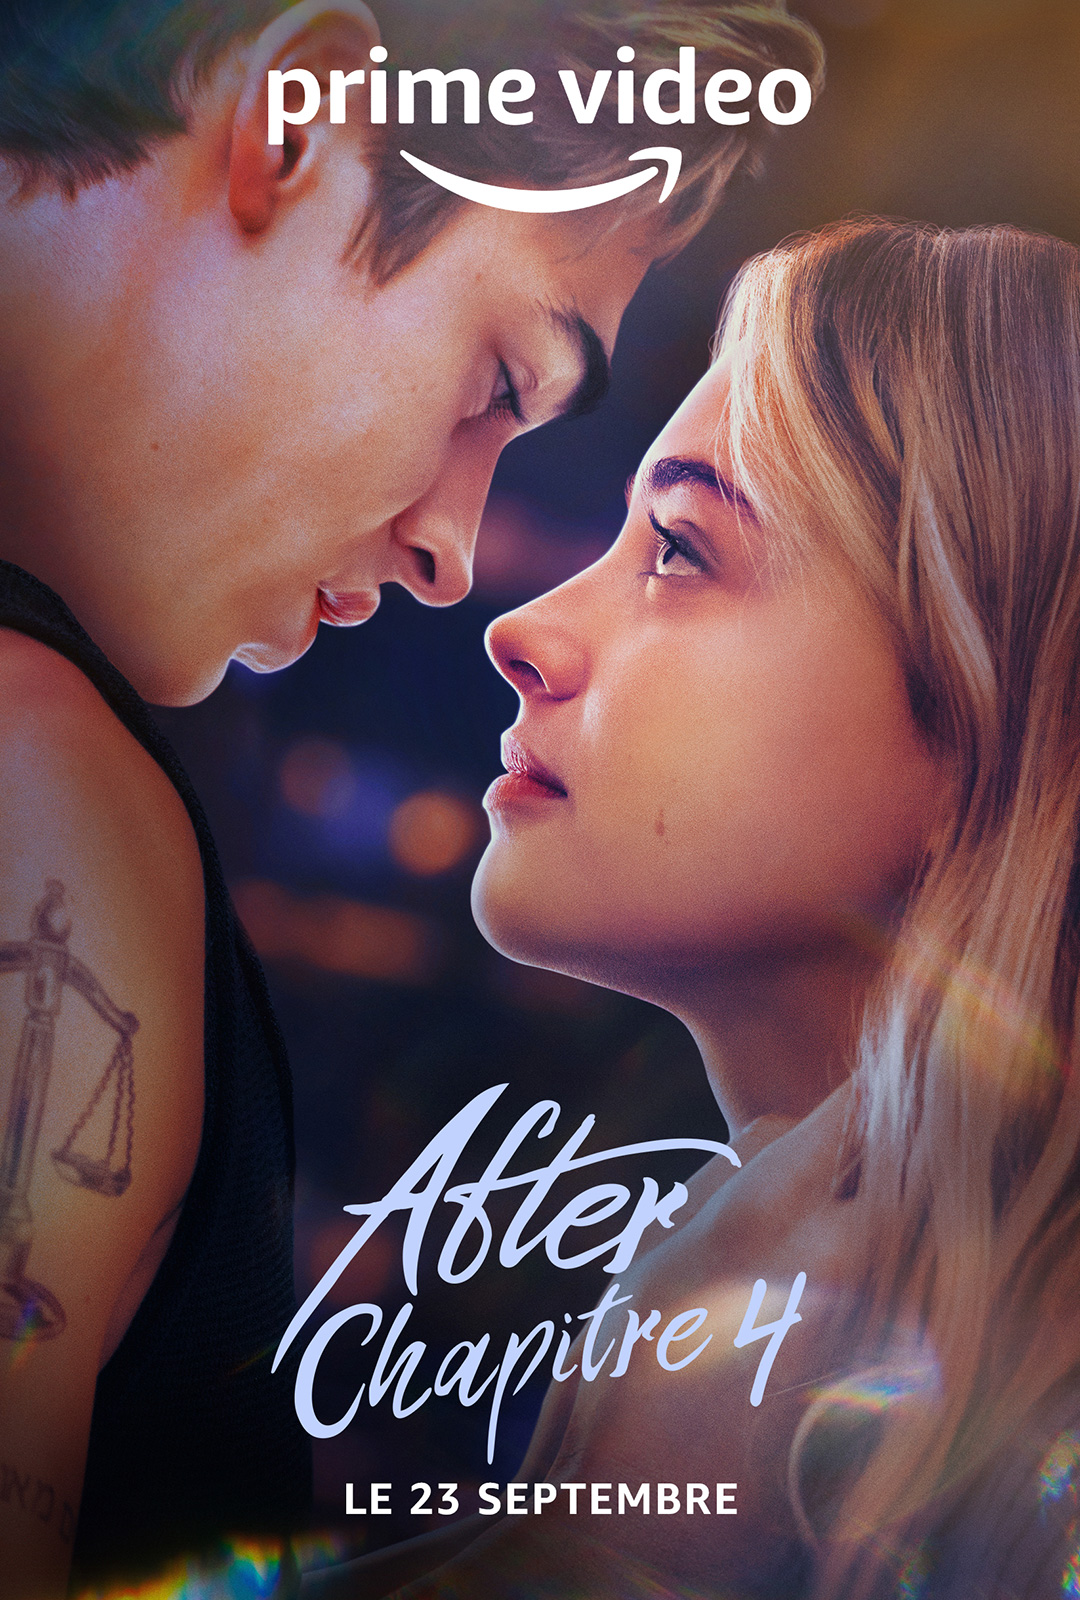 After - Chapitre 4 streaming